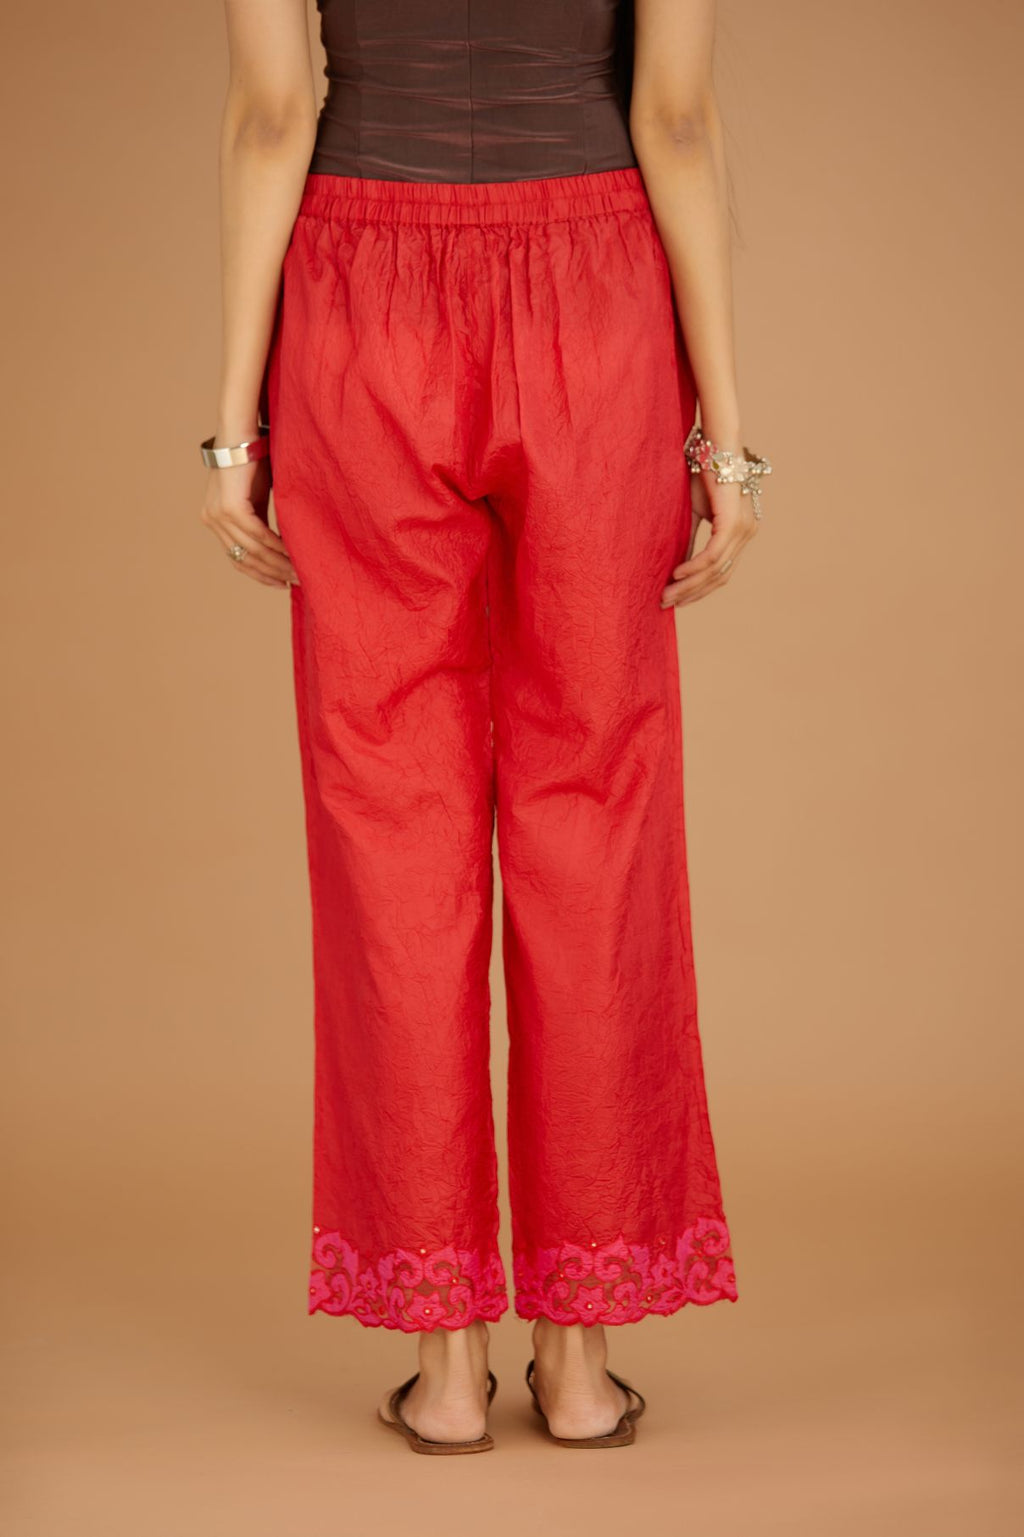 Red hand crushed silk pants with contrast silk and organza fabric cutwork embroidery at bottom hem, highlighted with hand attached mirrors.